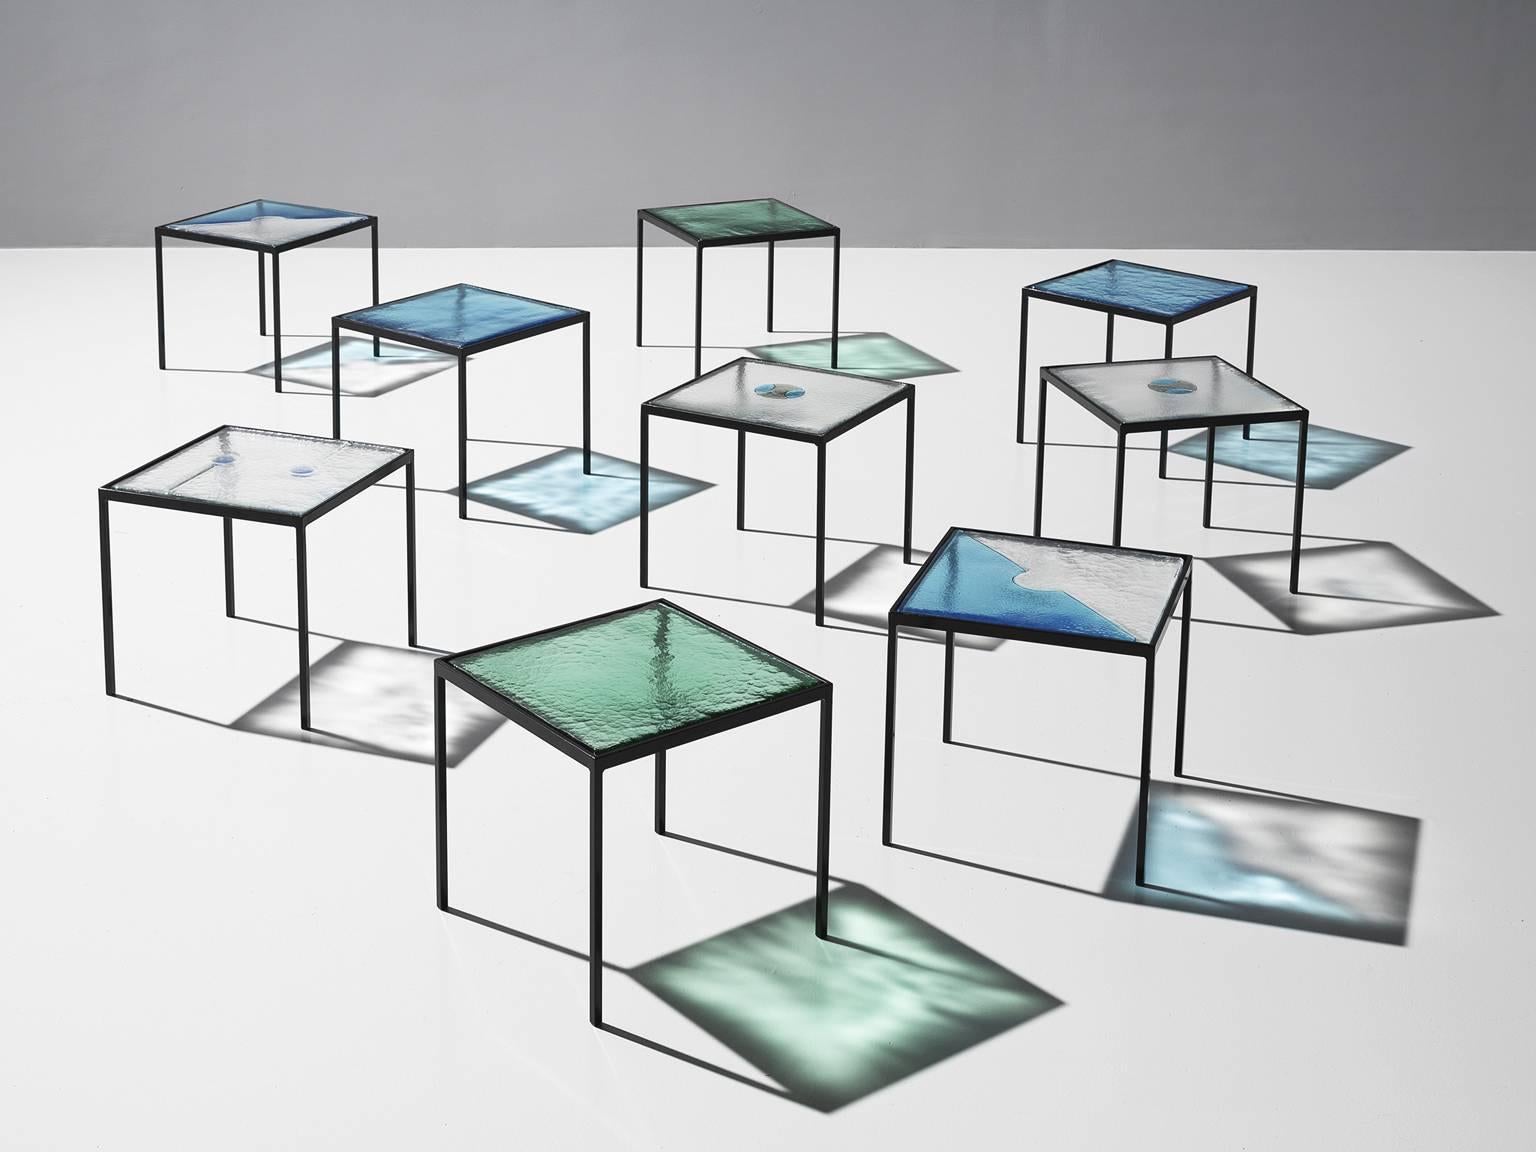 Side tables, blue, green and transparent glass and steel, Europe, 1980s.

This large set of side table is both playful in its aesthetics and solid in its construction. The set of nine lively tables all feature a different top of structured glass yet